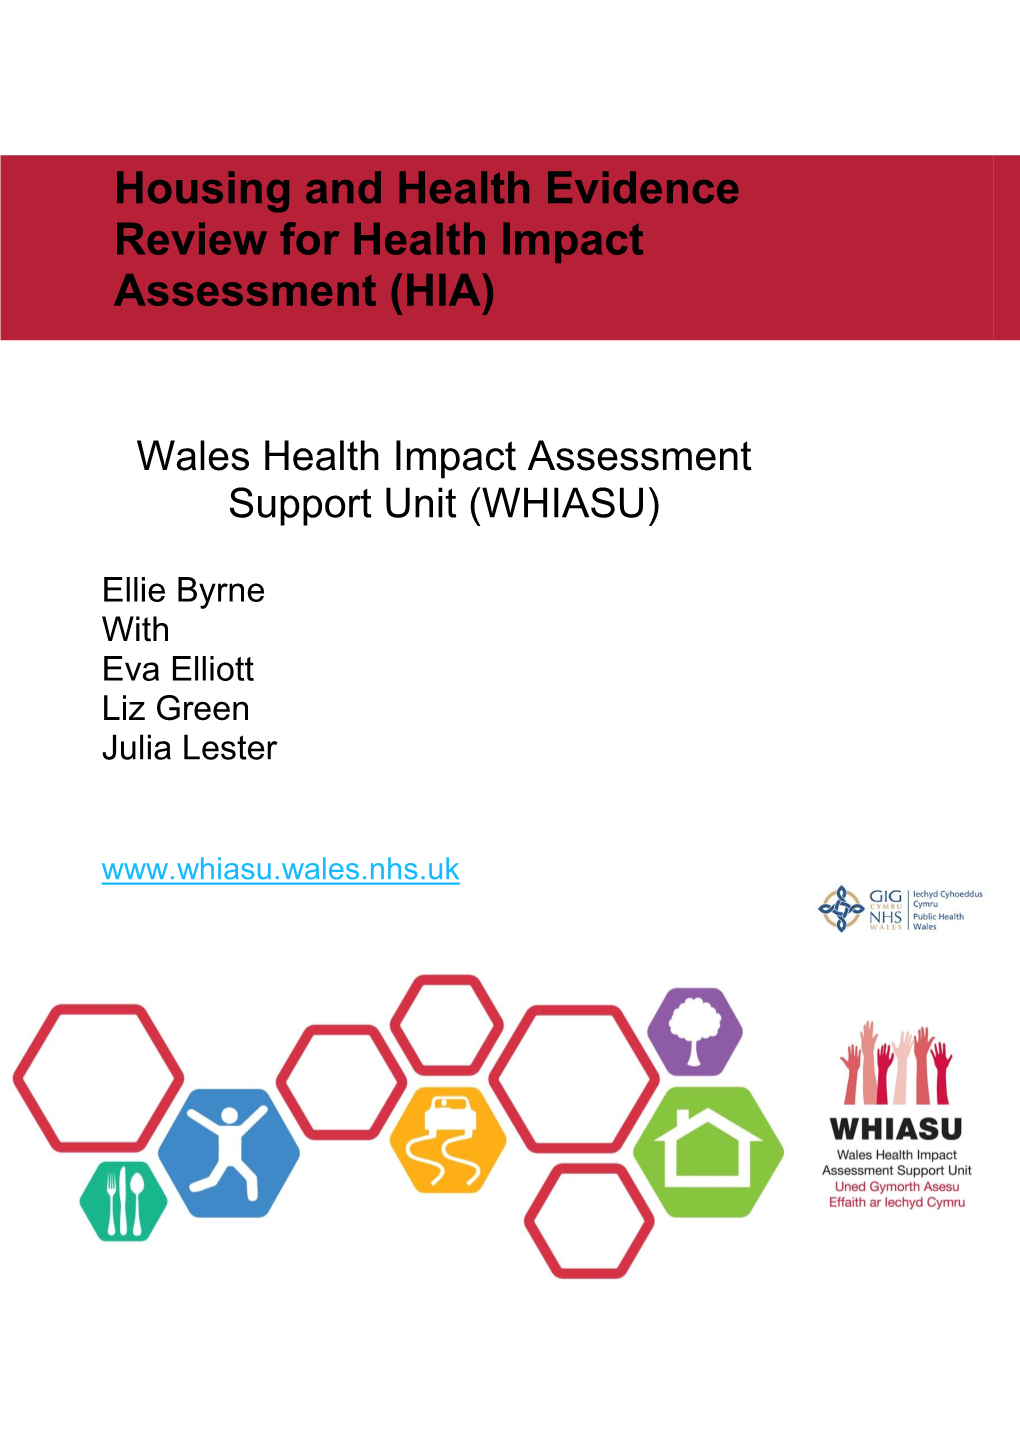 Evidence Review for Health Impact Assessment (HIA) and Housing